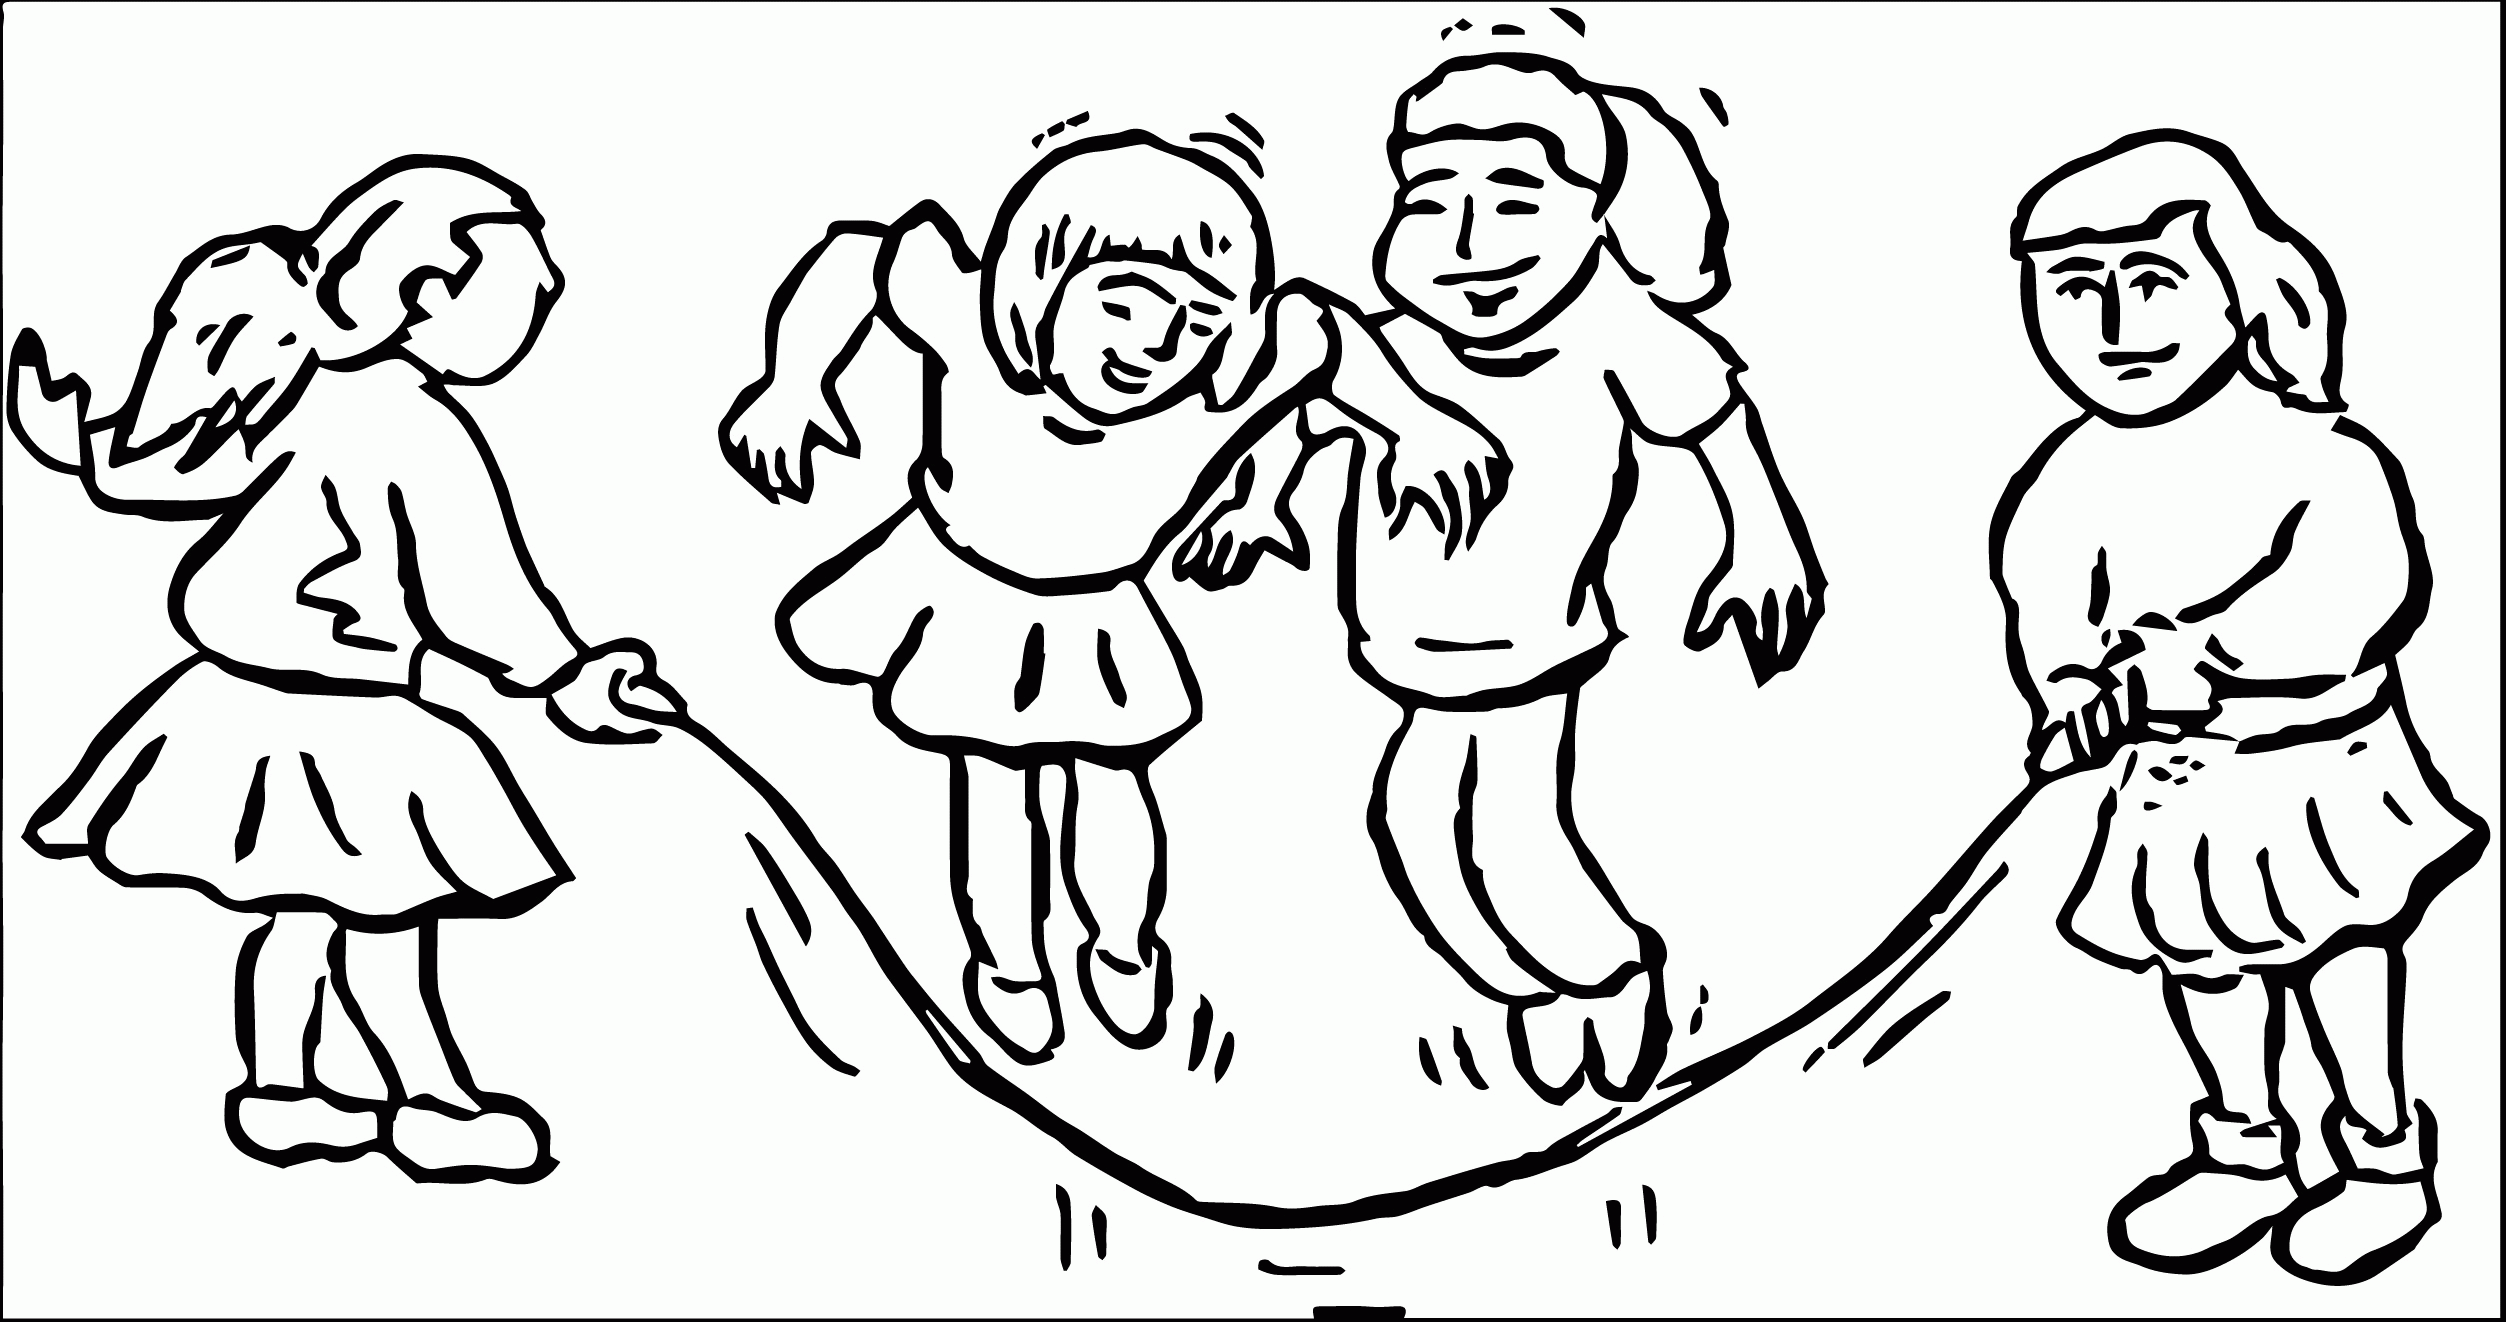 Download Kids Sharing Coloring Page - Coloring Home